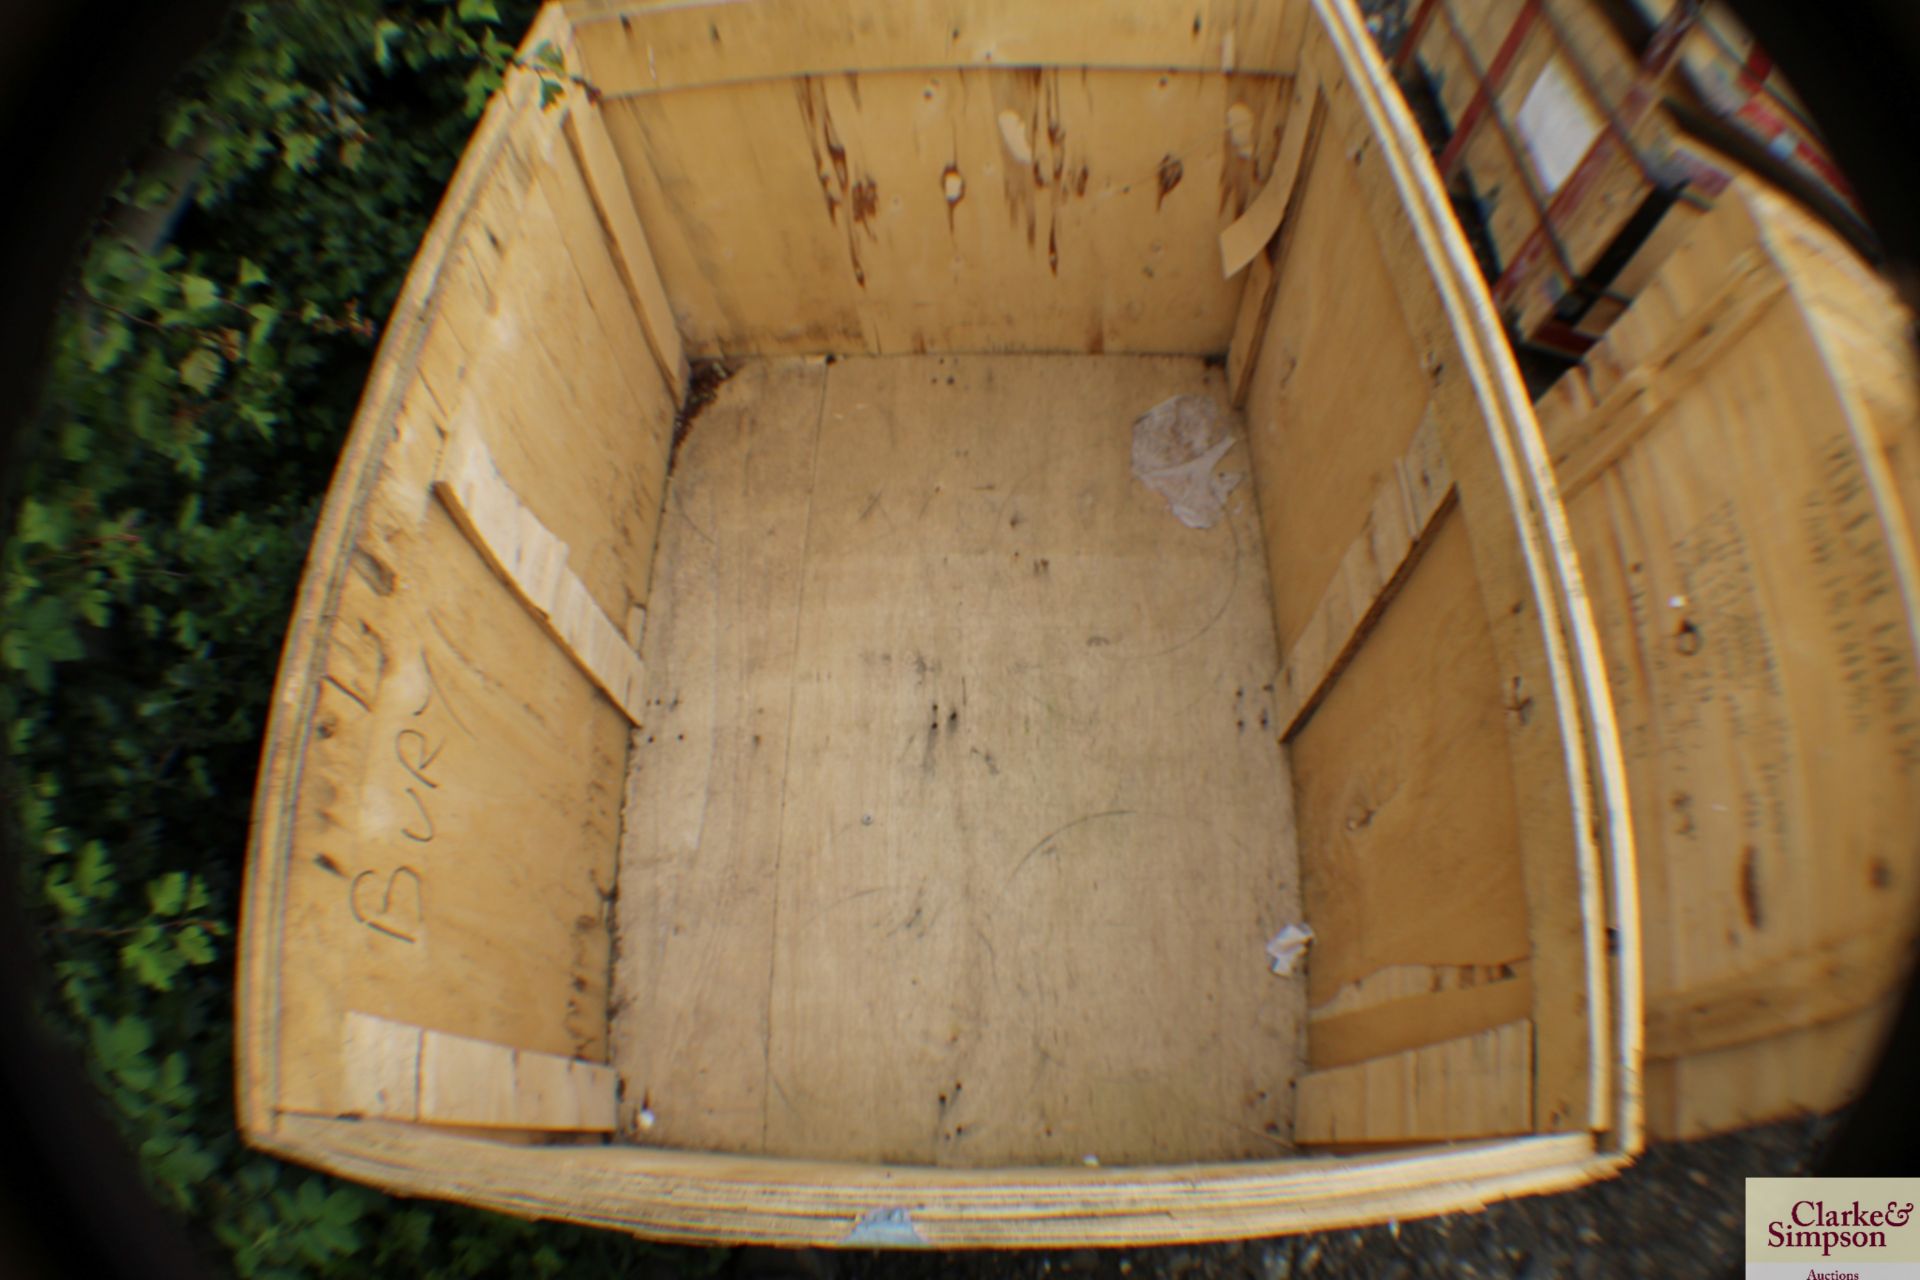 2x wooden pallet boxes. - Image 2 of 3